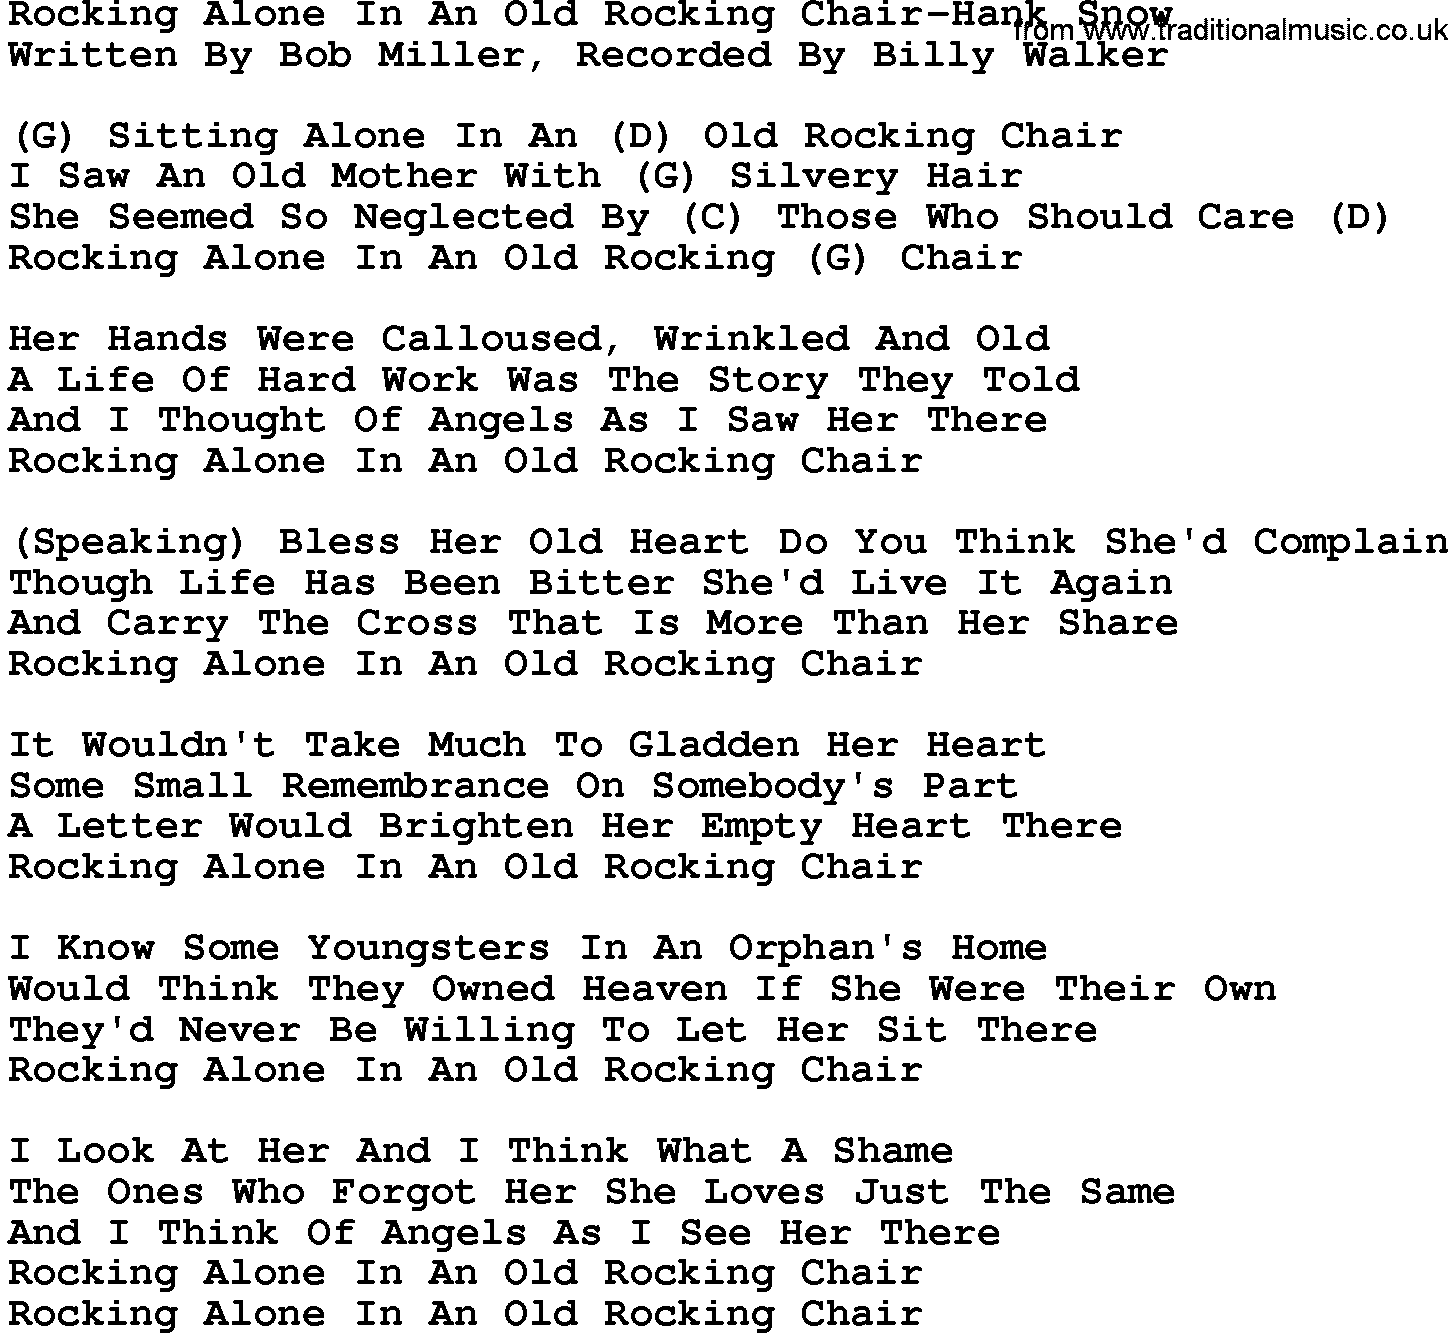 Country music song: Rocking Alone In An Old Rocking Chair-Hank Snow lyrics and chords